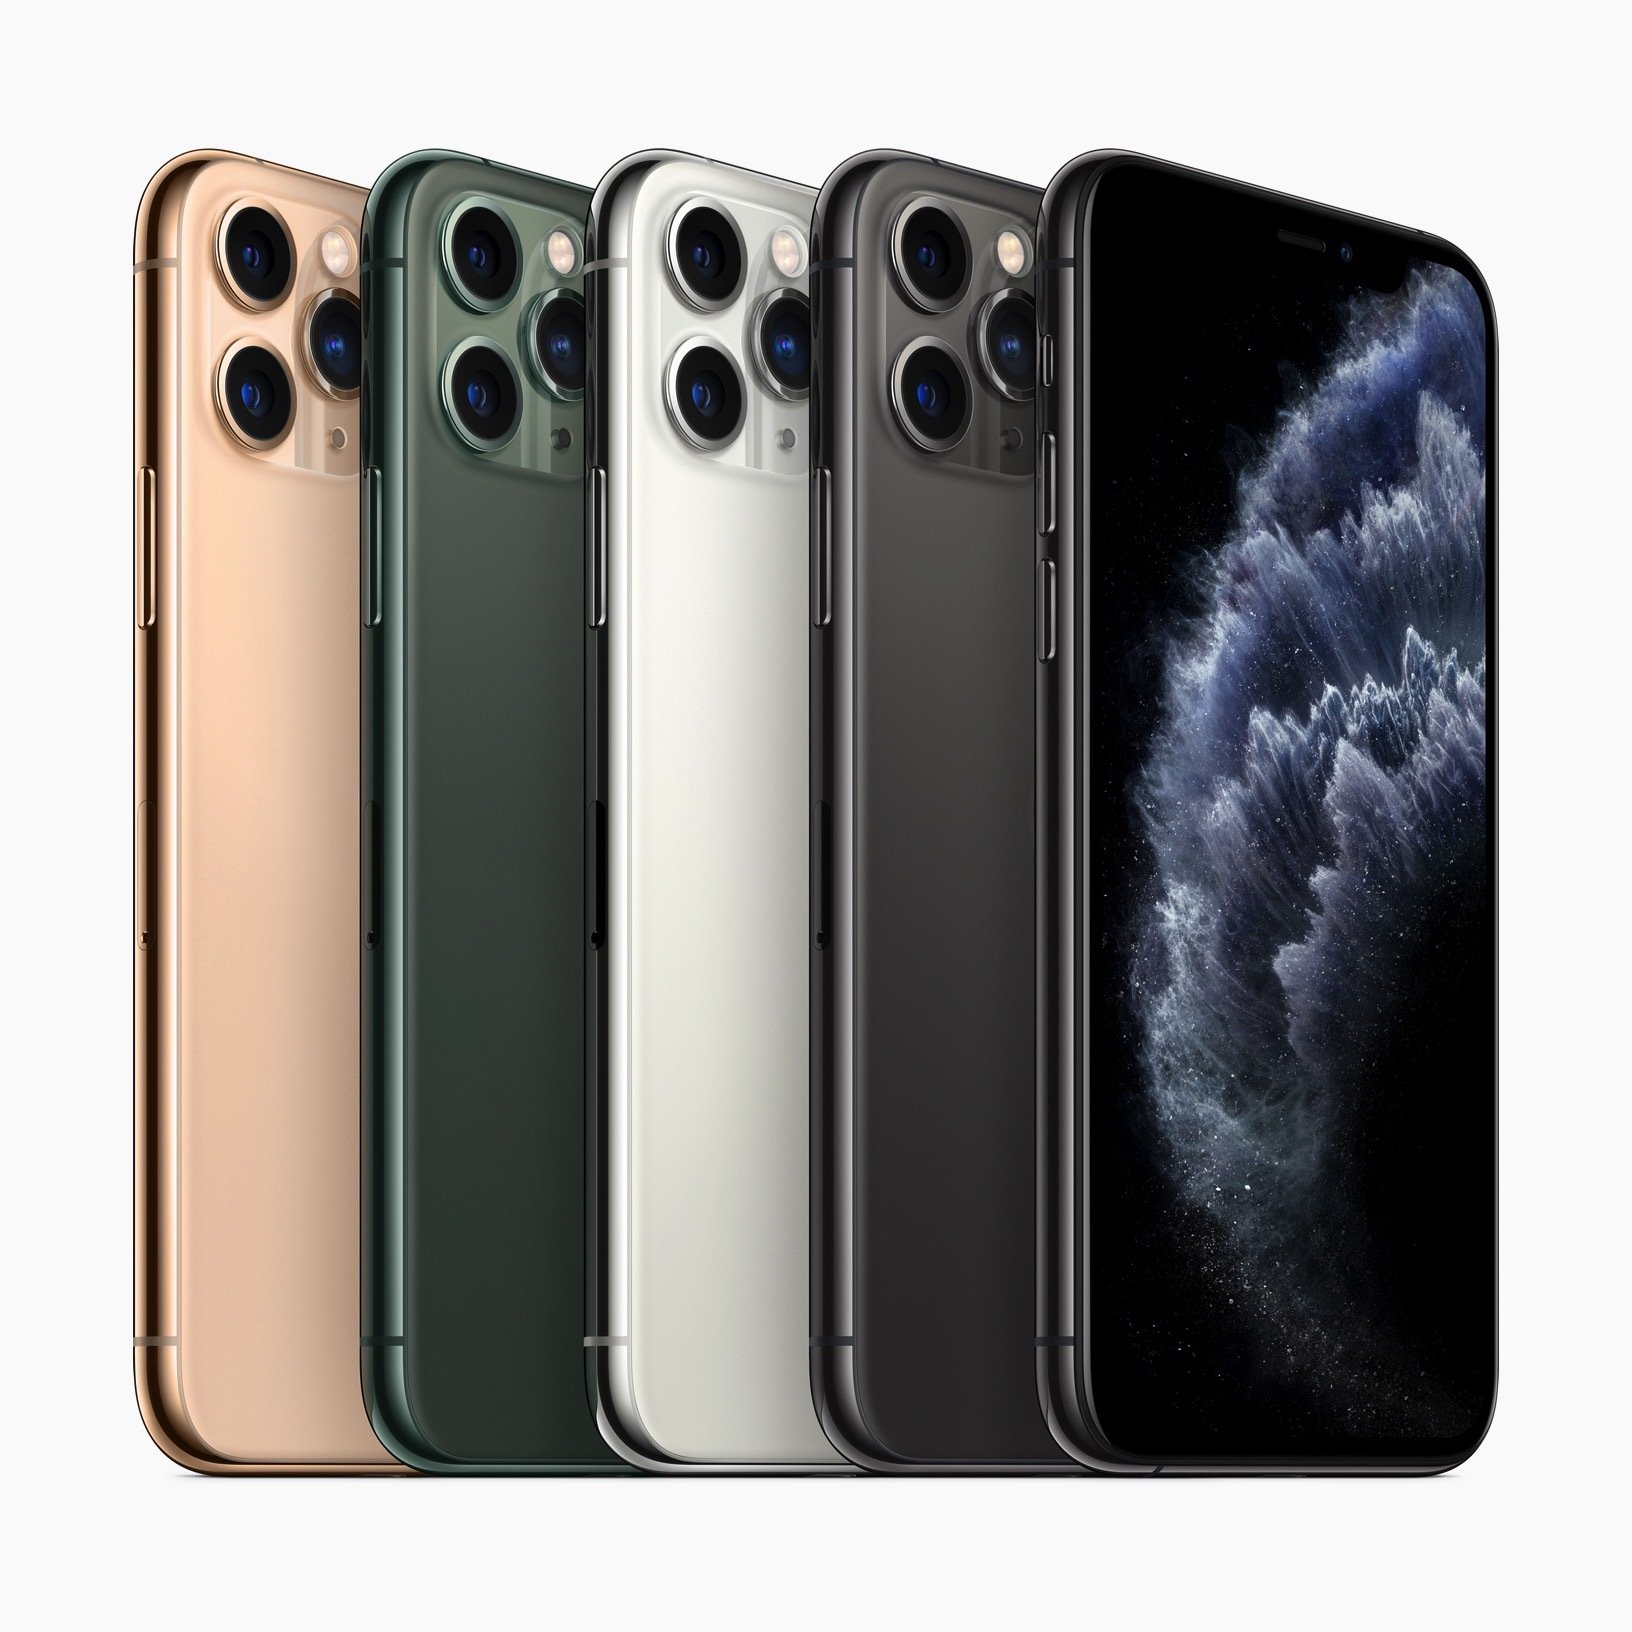 Apple increases iPhone 11 Pro prices in India after rise in Custom Duty